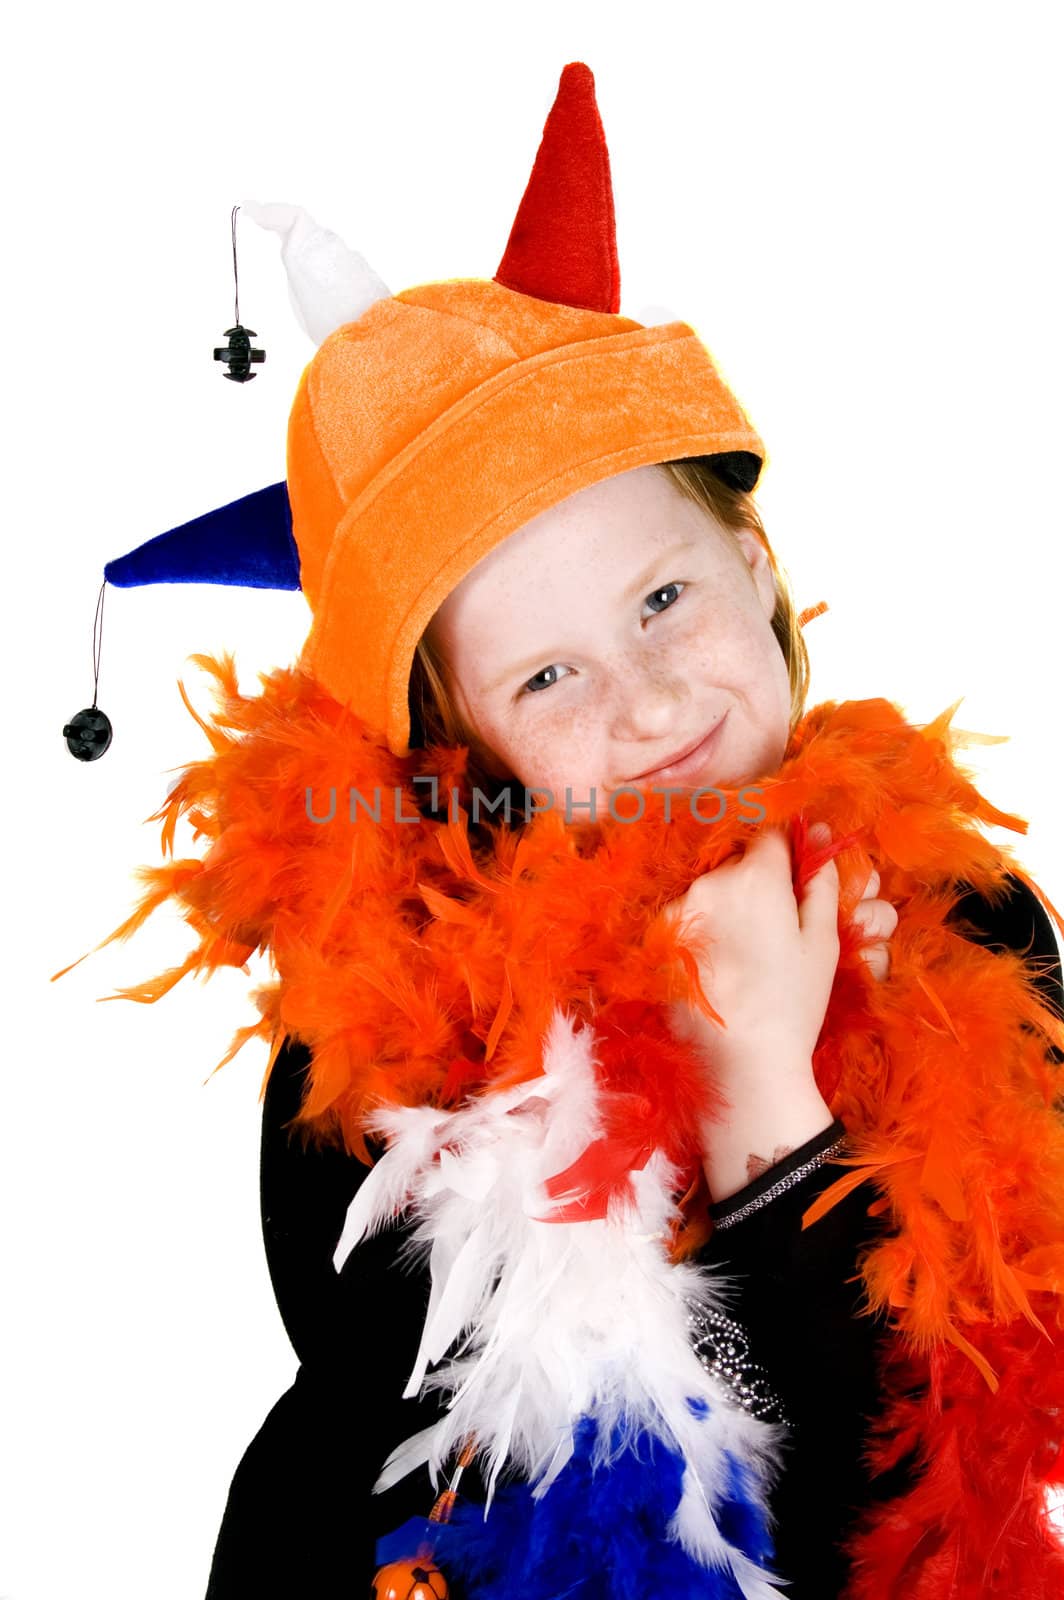 little girl ready to celebrate queensday by ladyminnie